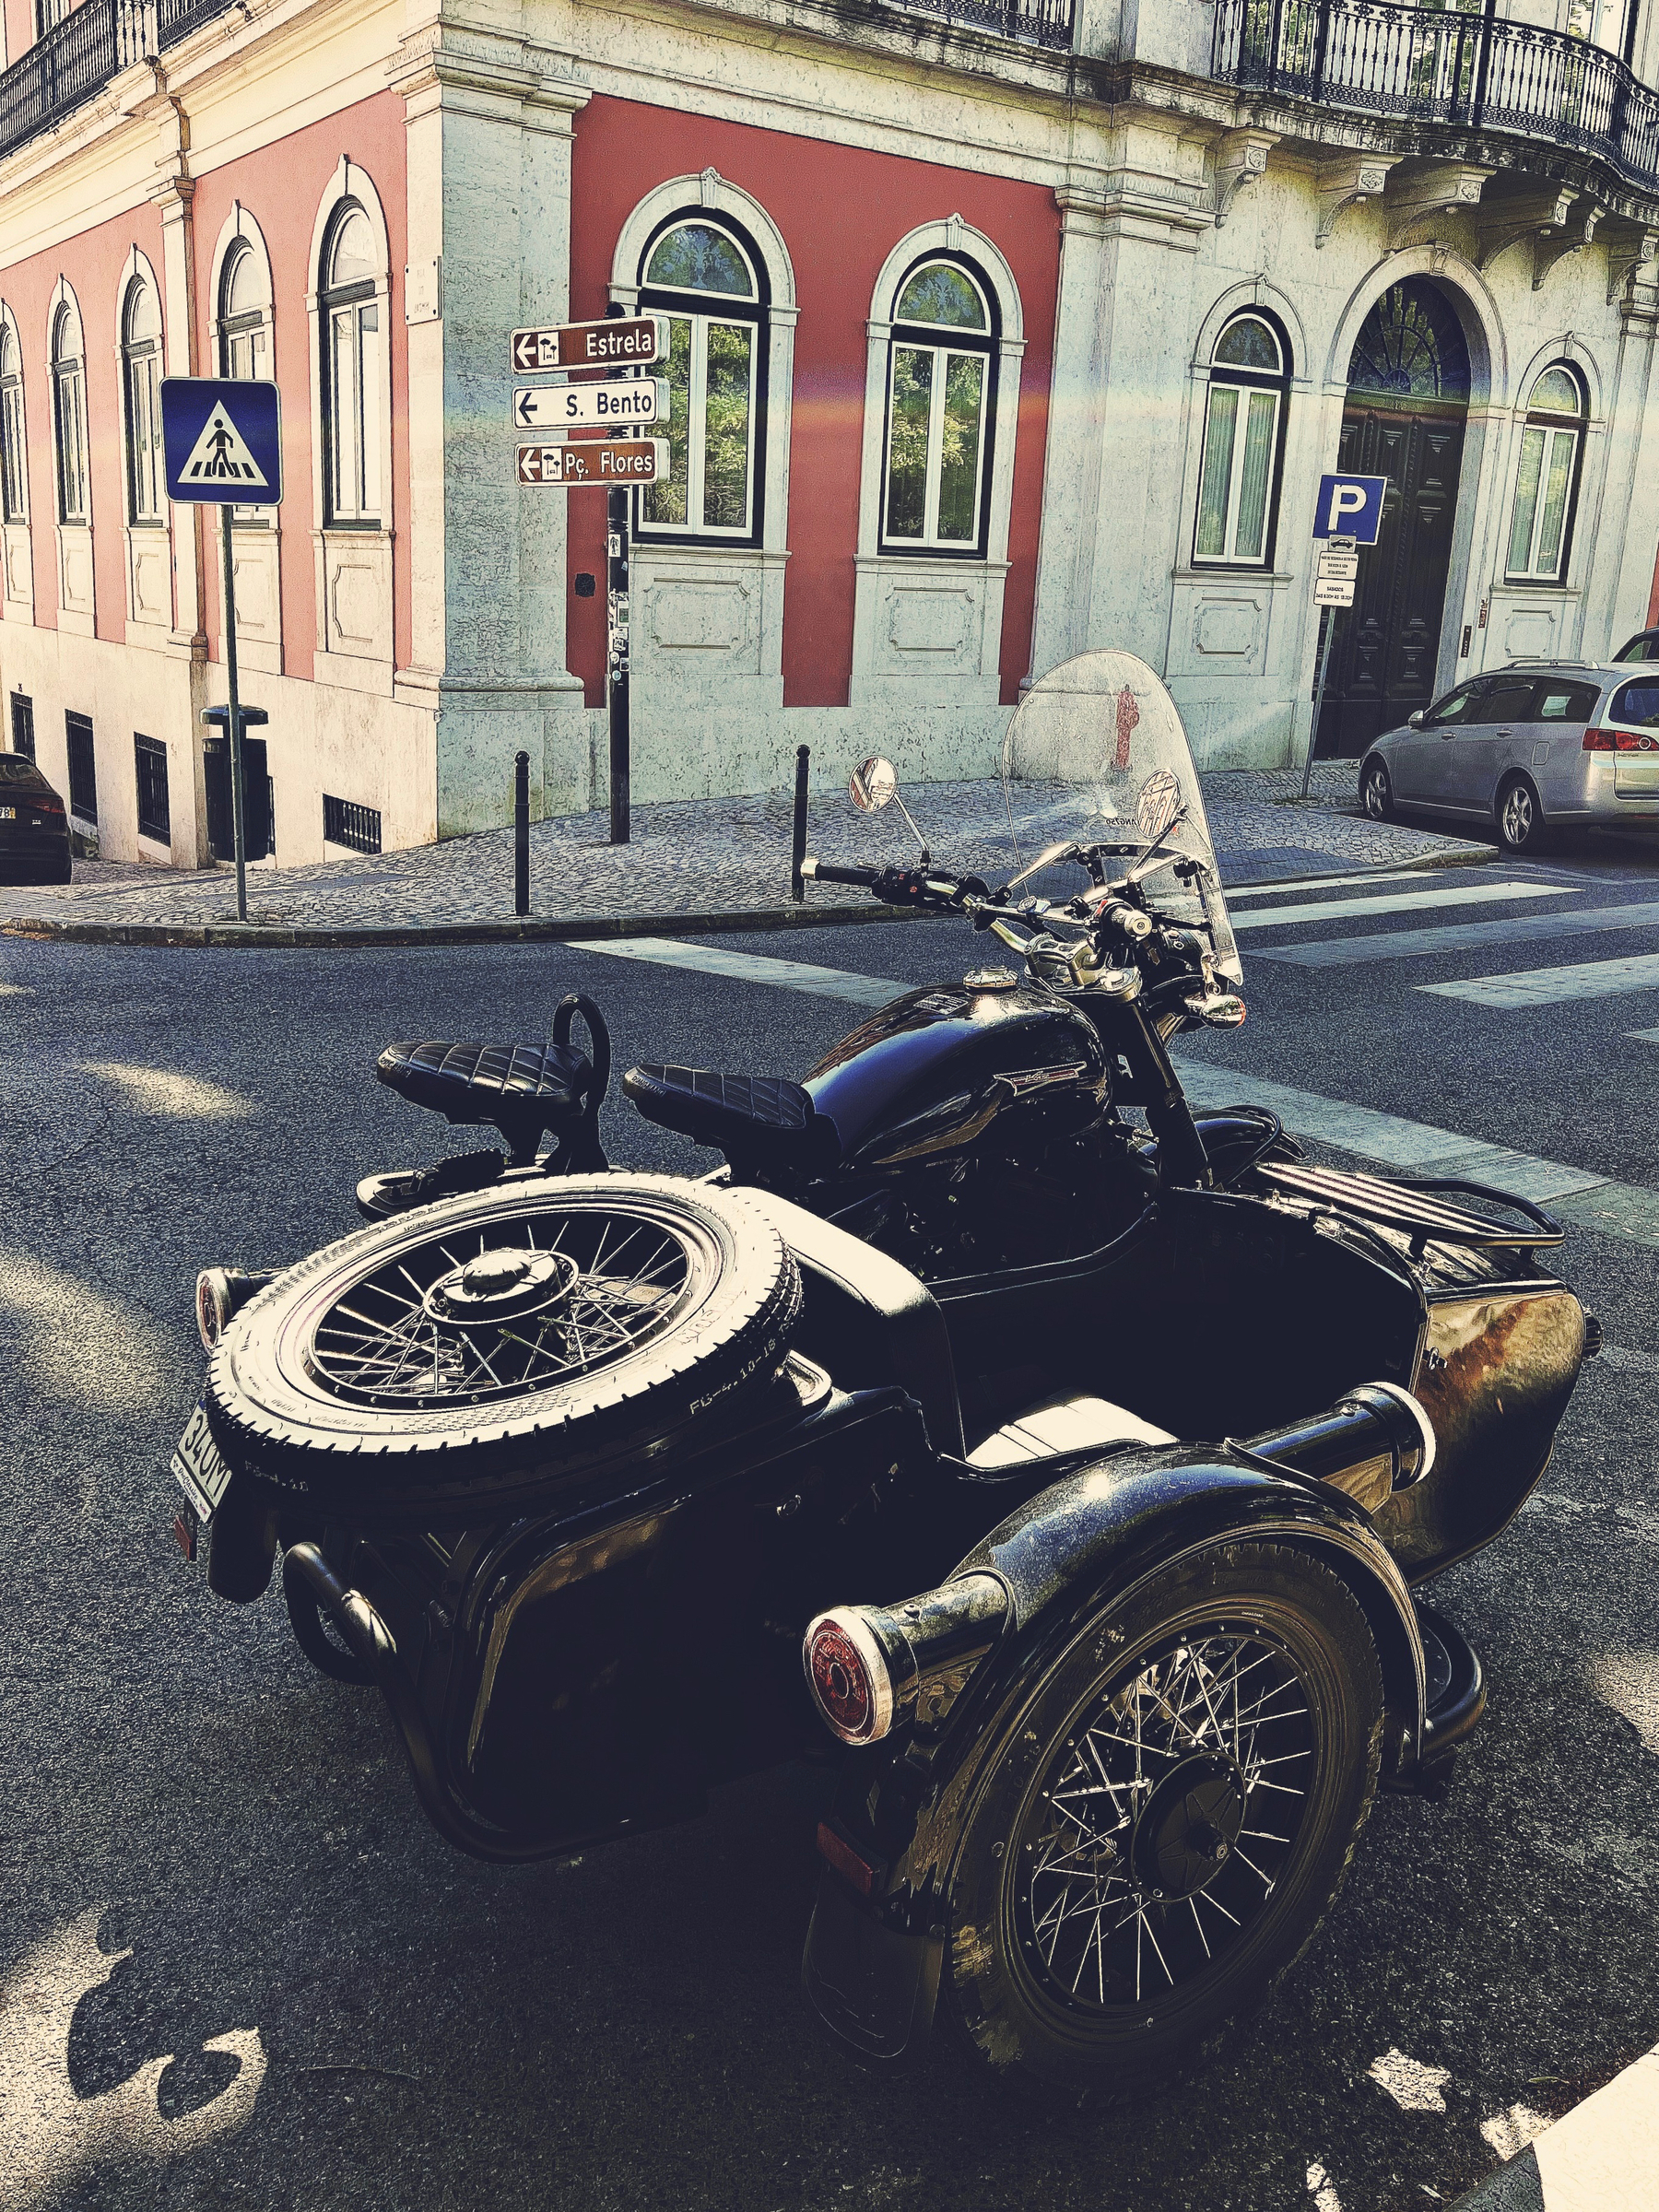 A motorcycle with a side car. 